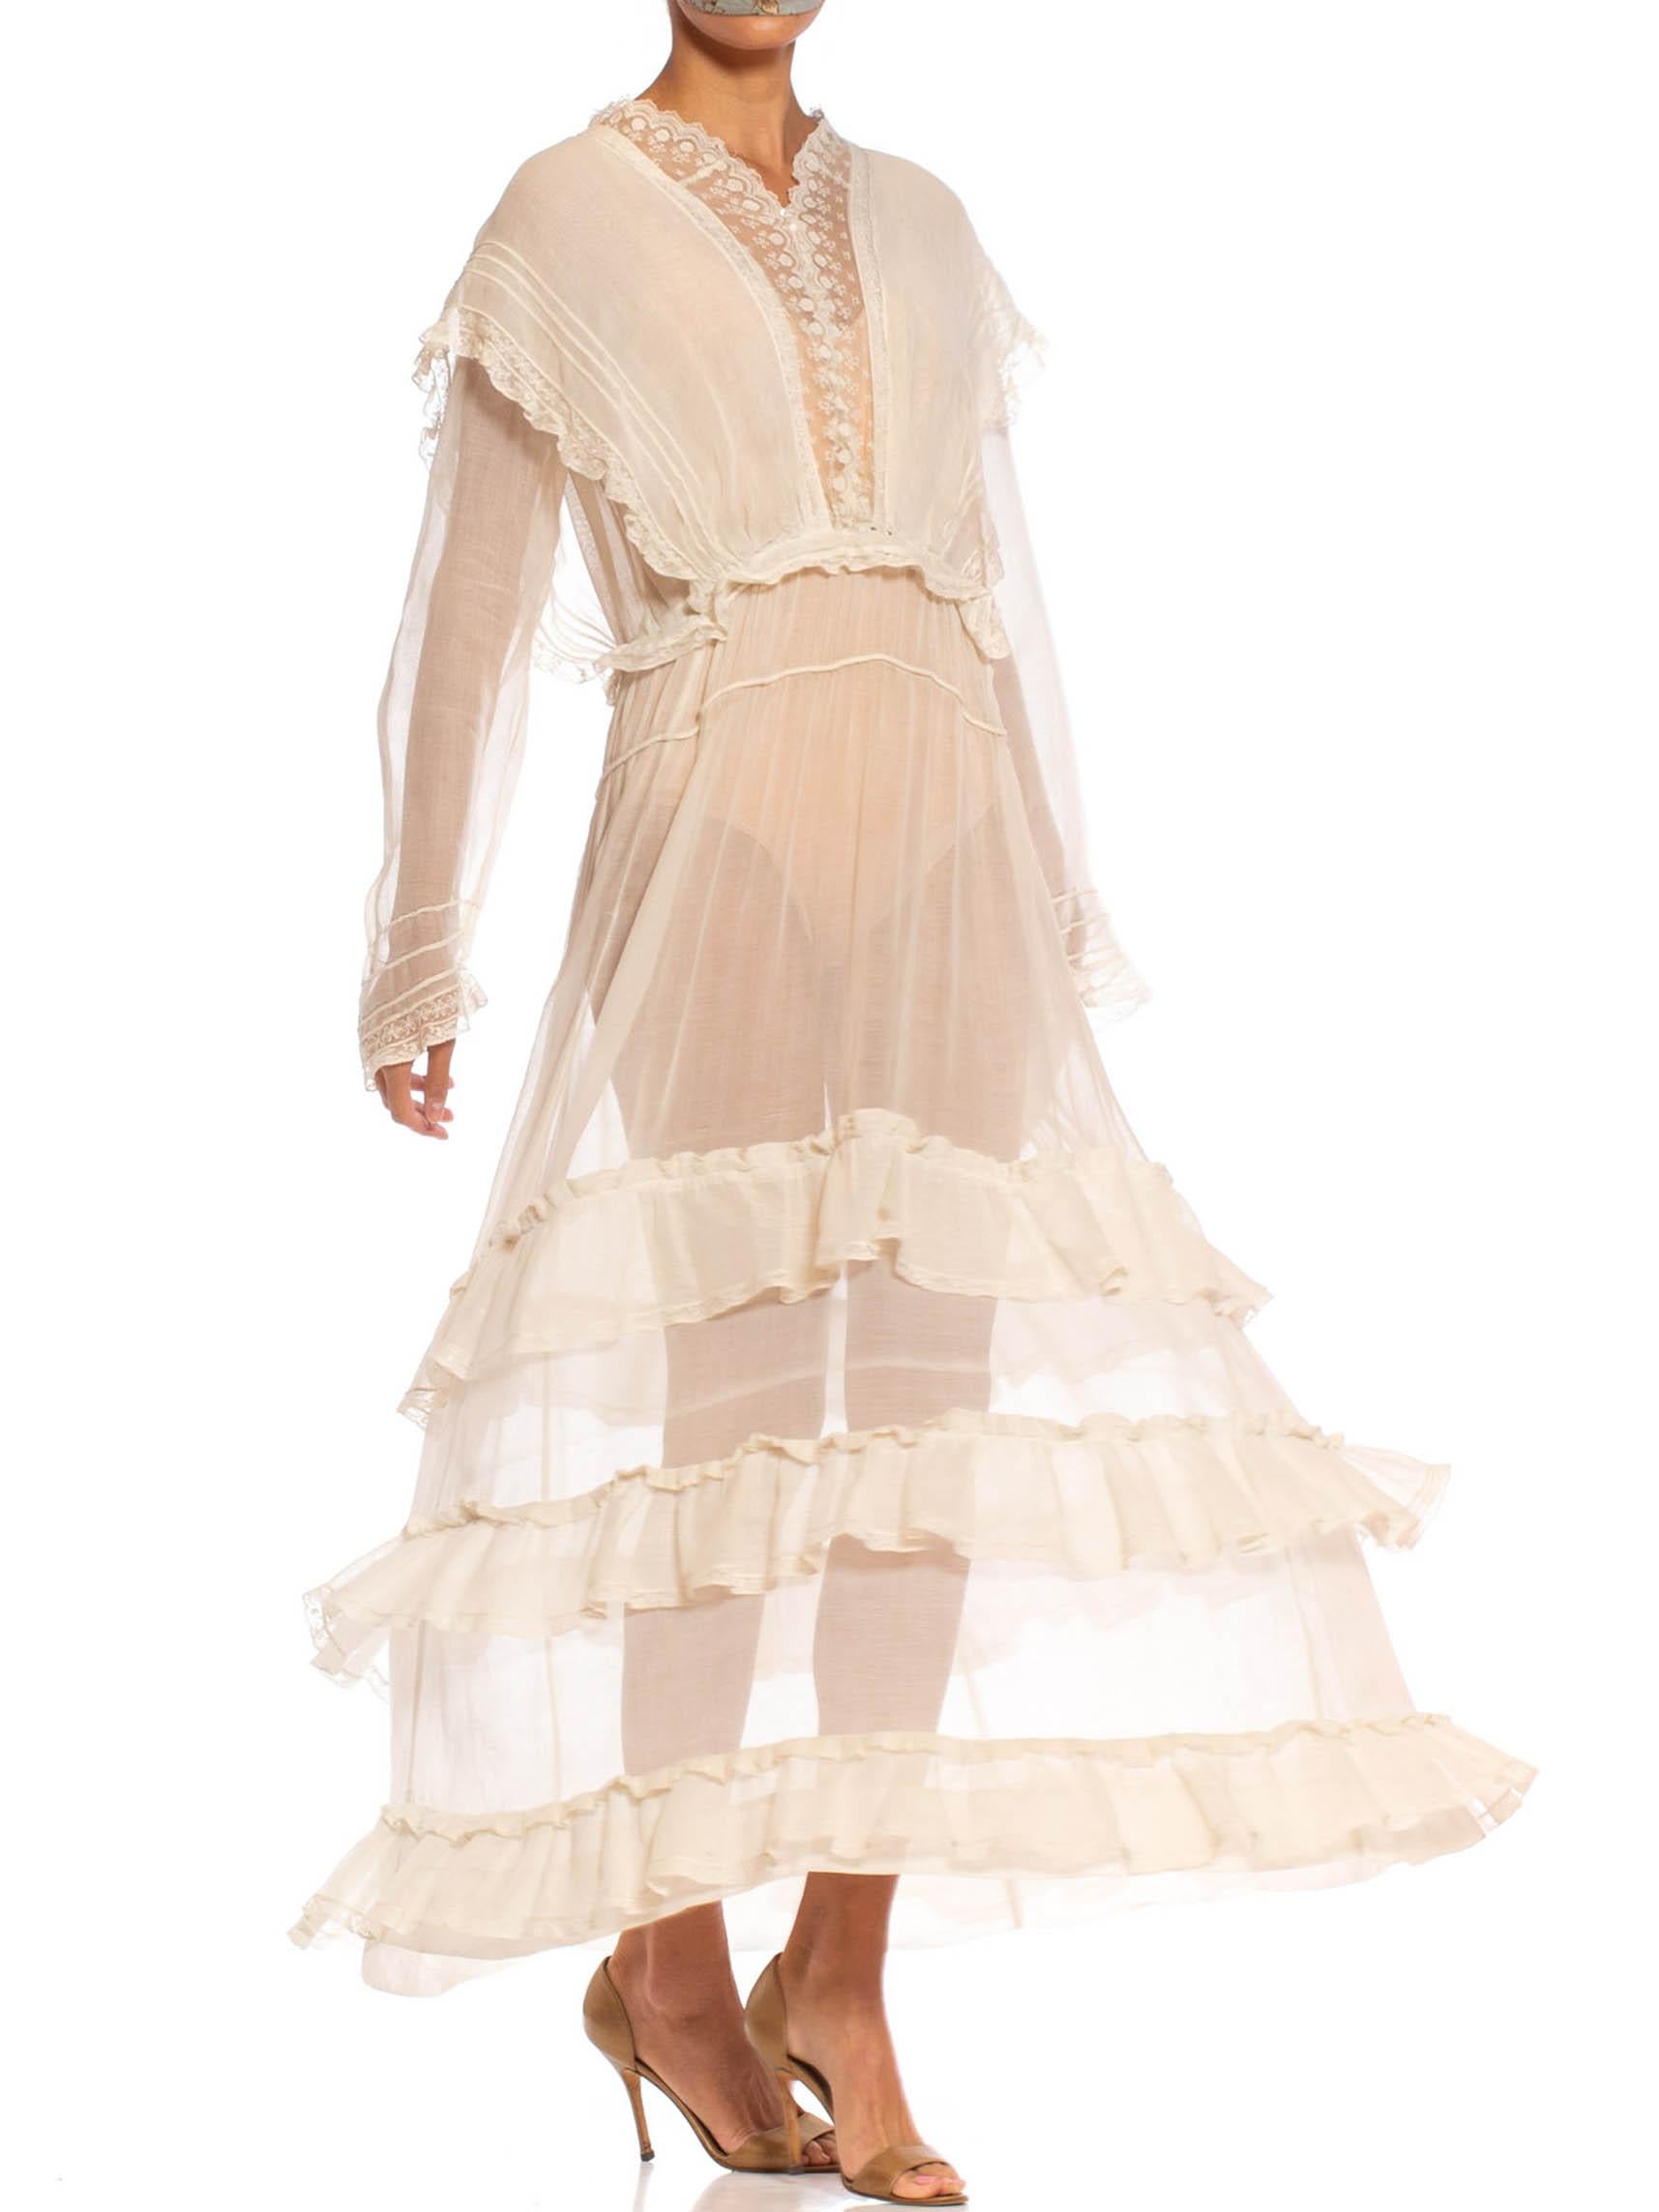 Edwardian Off White Organic Cotton Voile & Lace Long Sleeved Ruffled Tea Dress For Sale 4